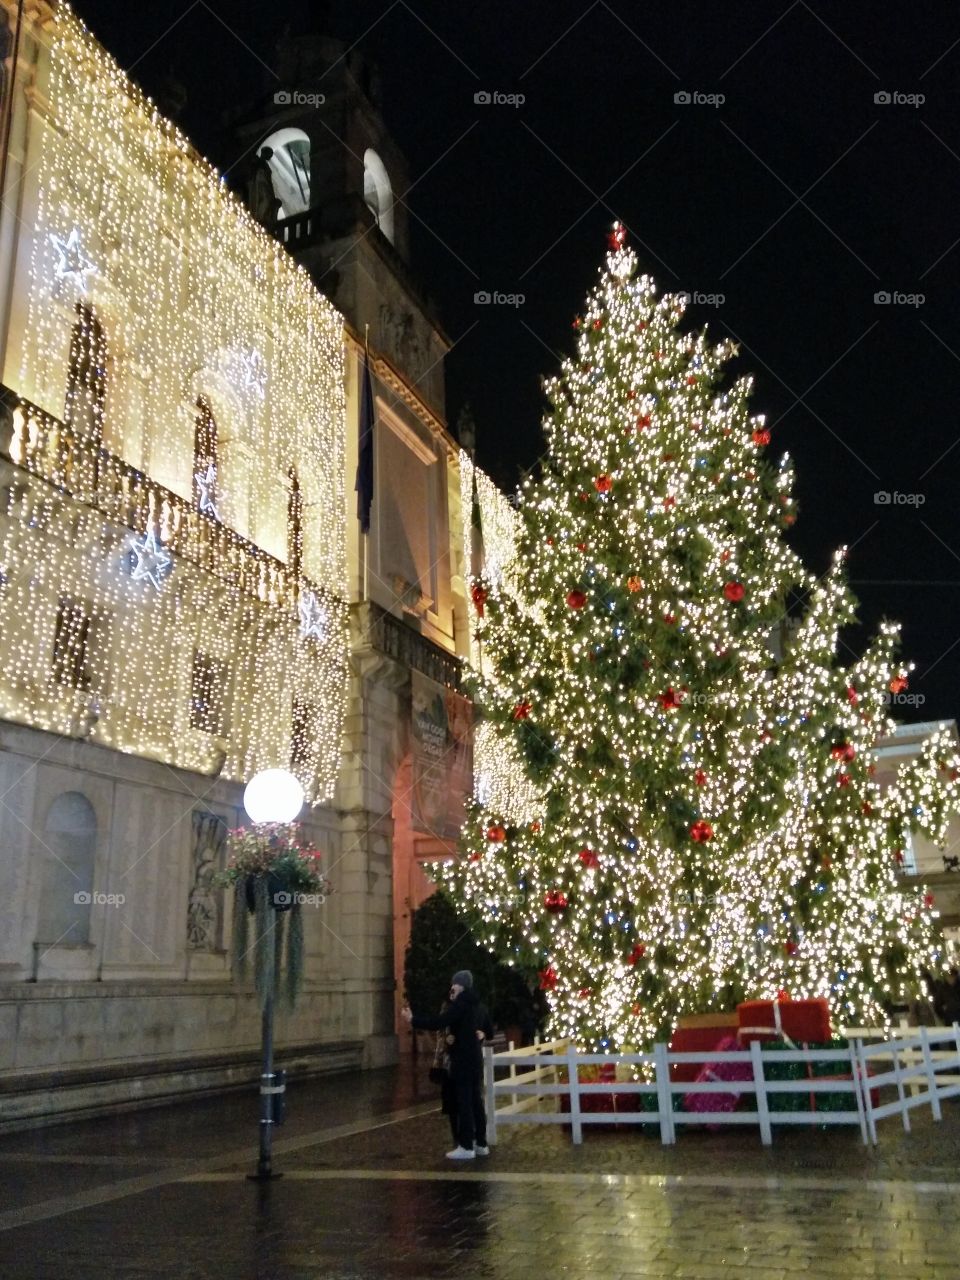 Christmas lights and tree in Padua italy city centre